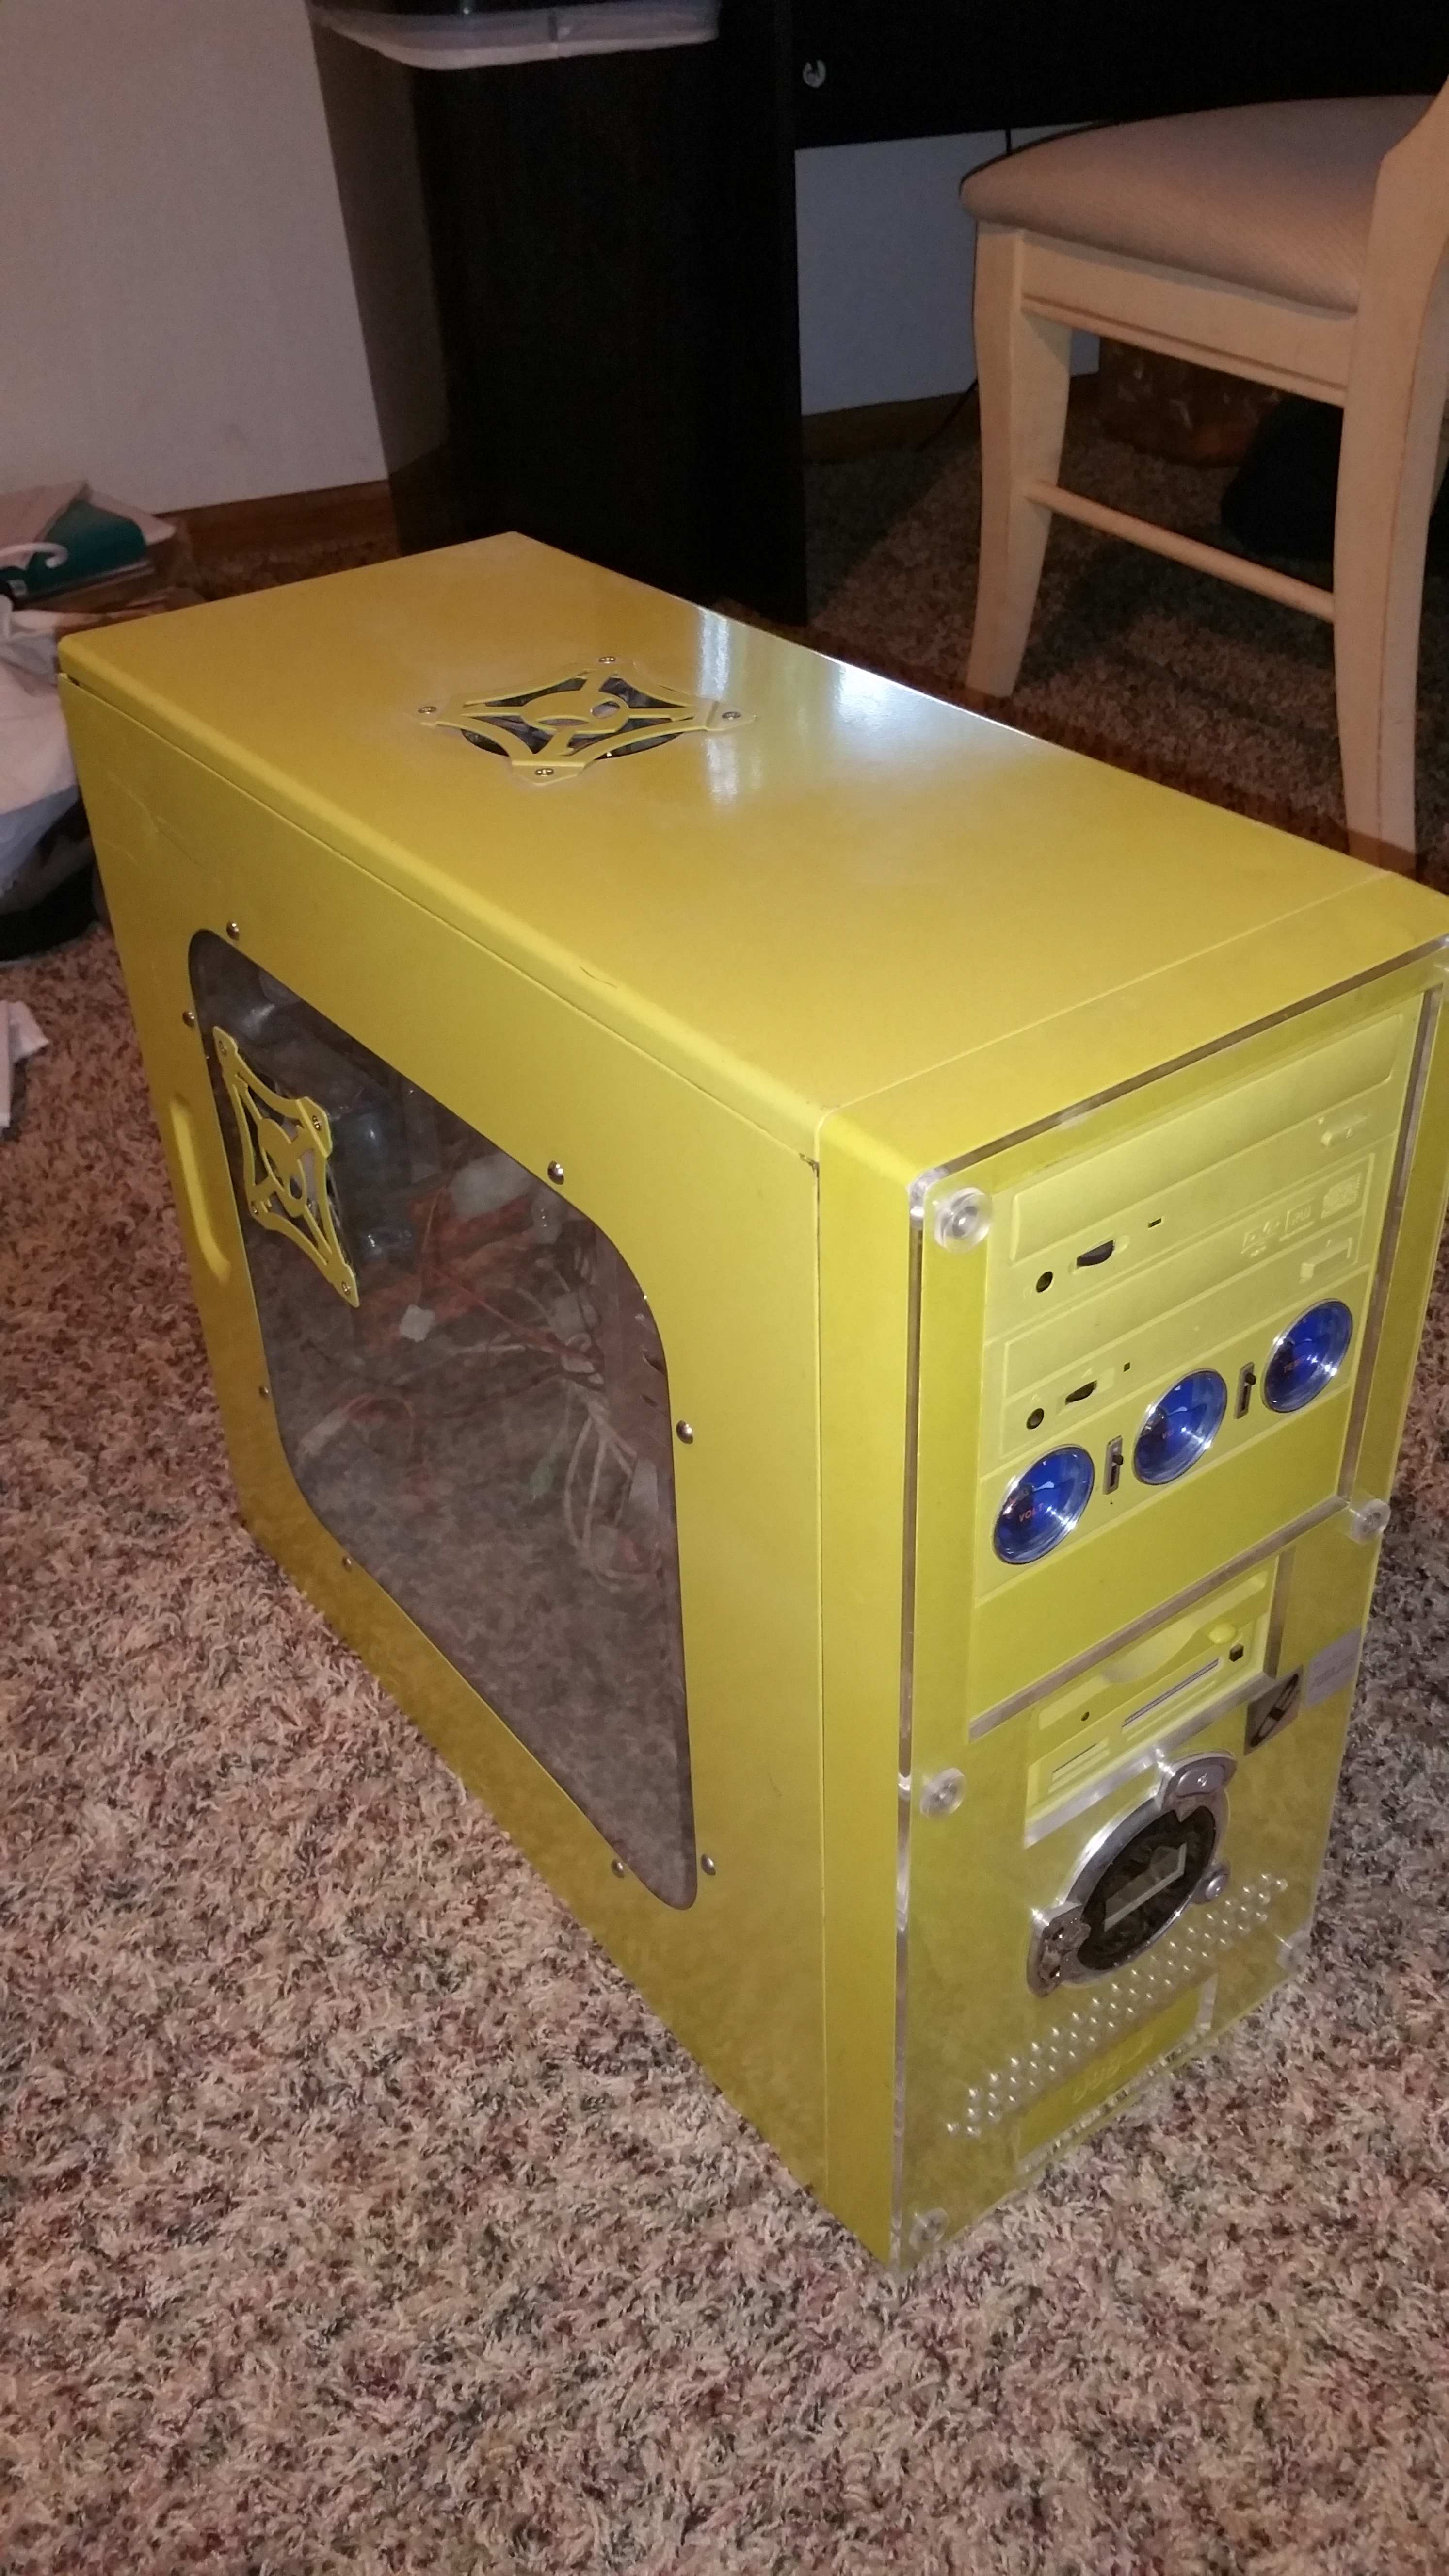 Vintage Alienware Tower (pre dell) approximate value